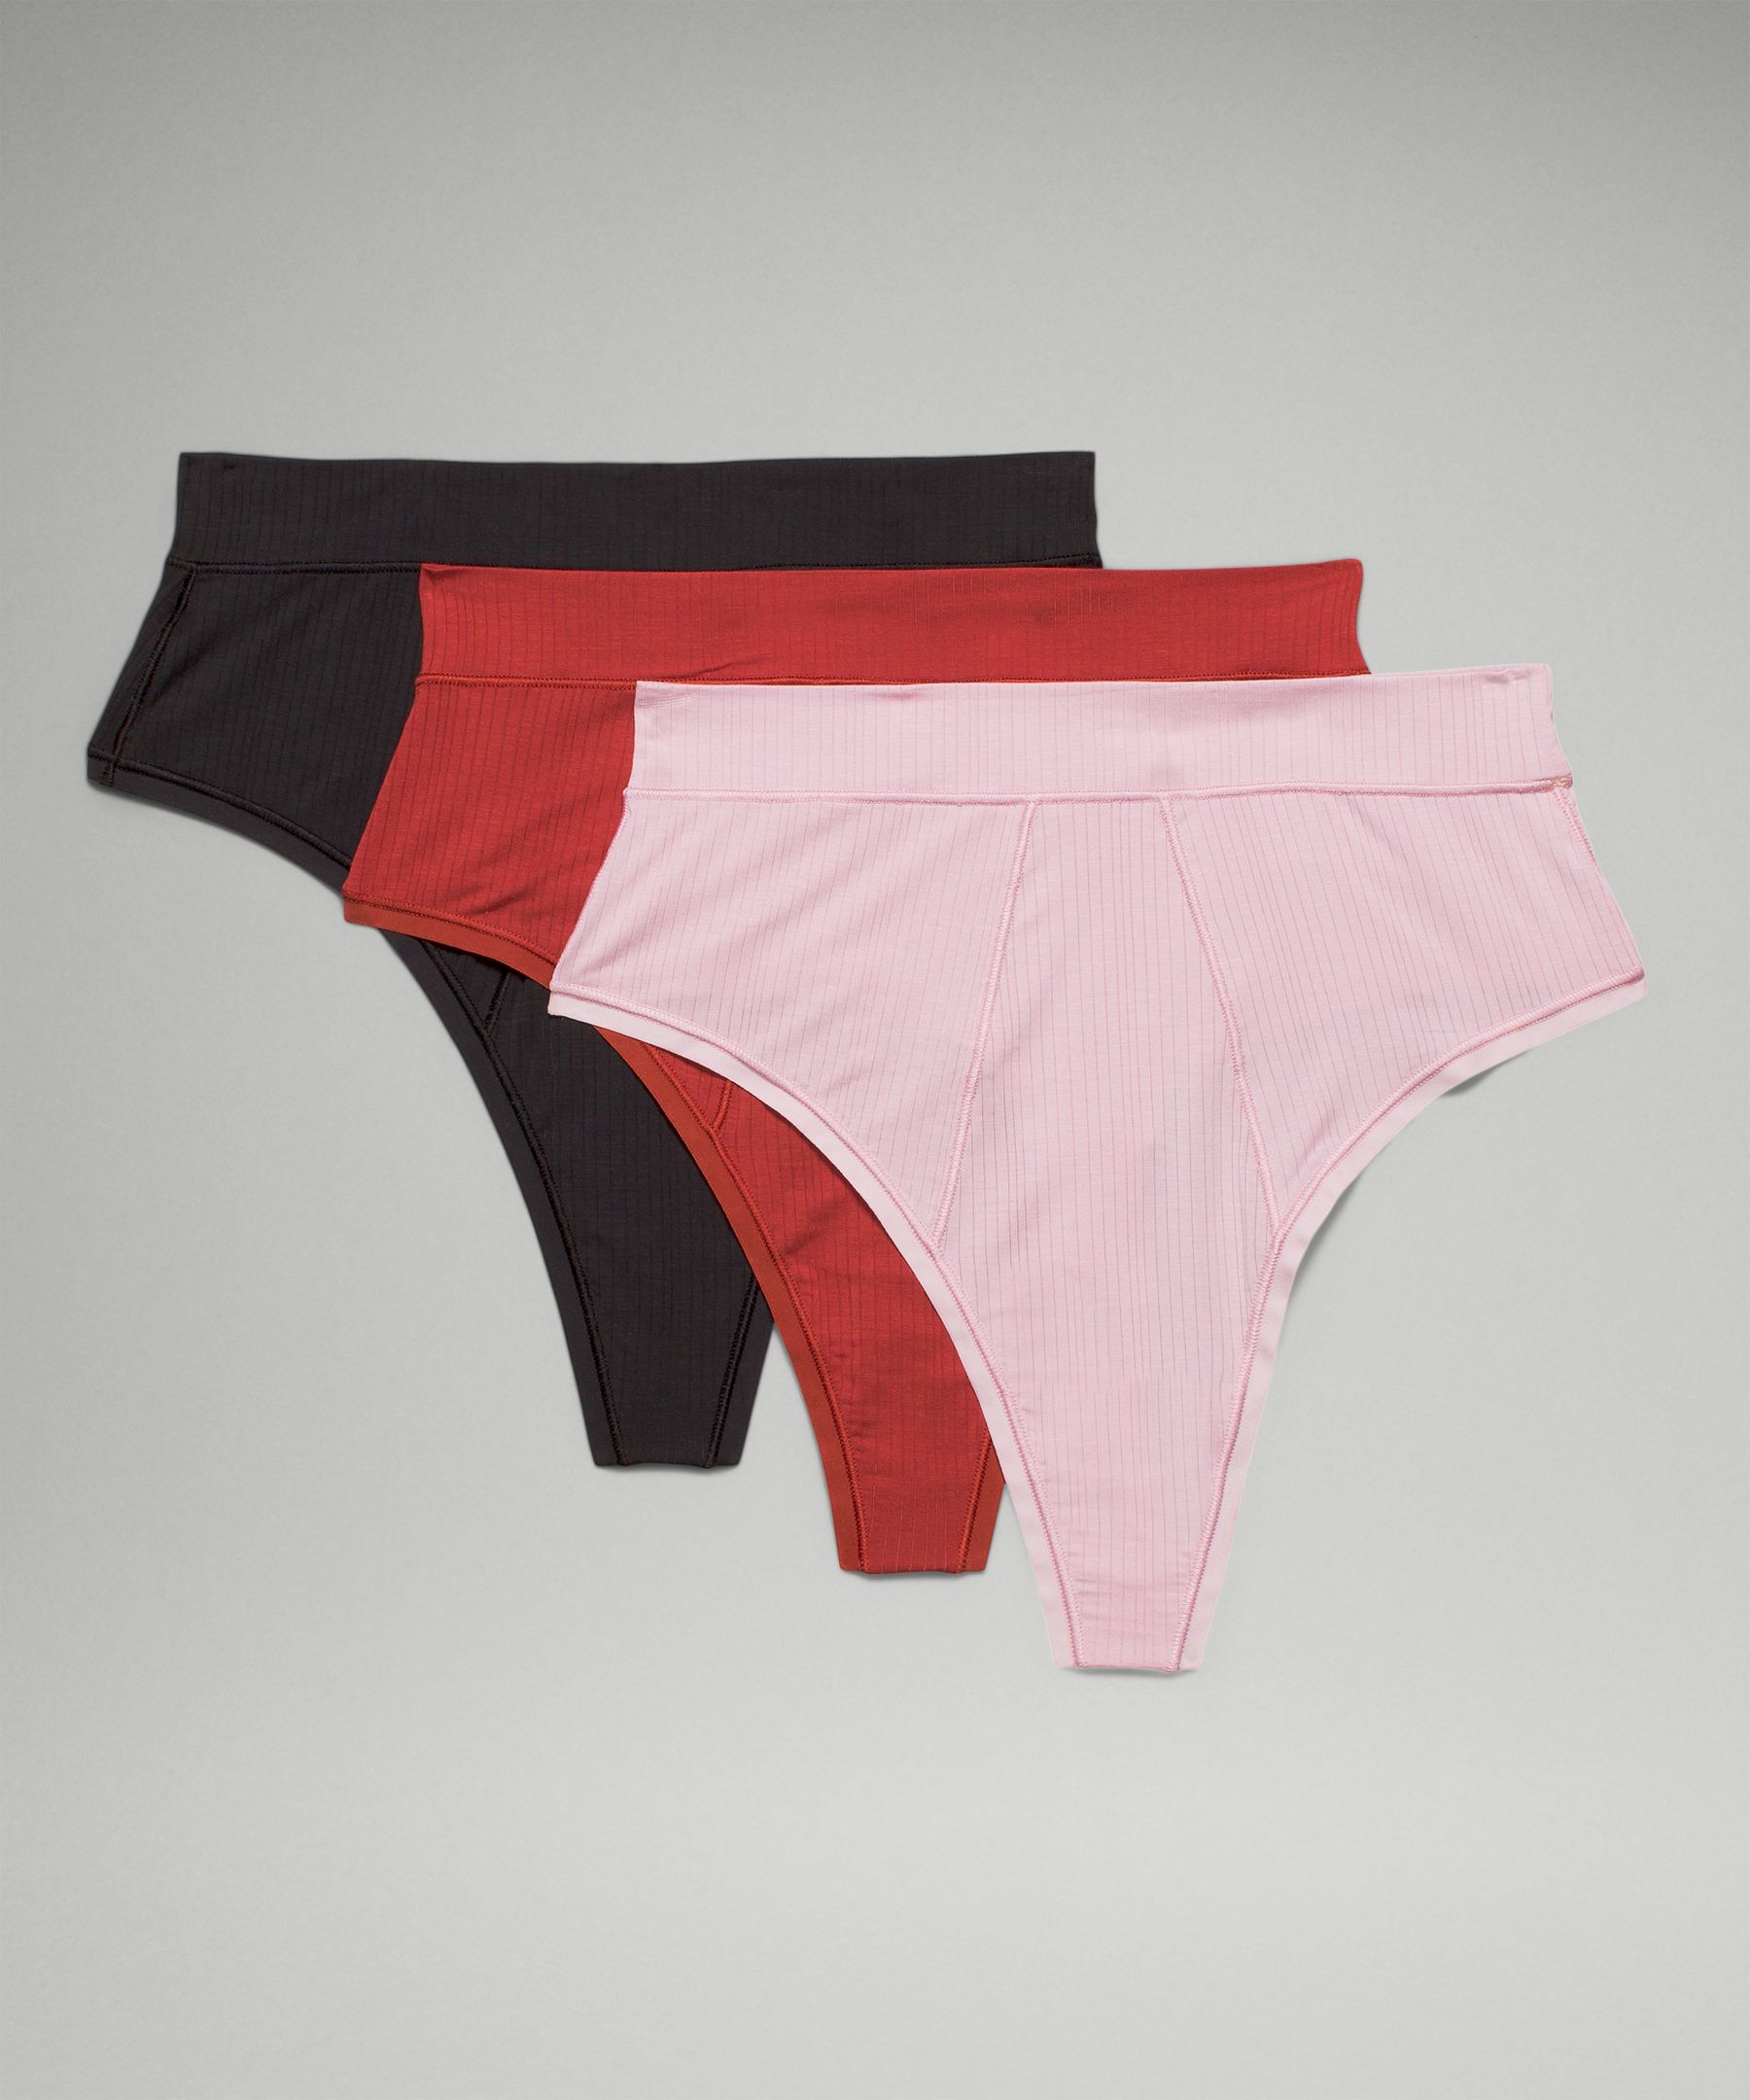 lululemon athletica Underease High-rise Thong Underwear 3 Pack in